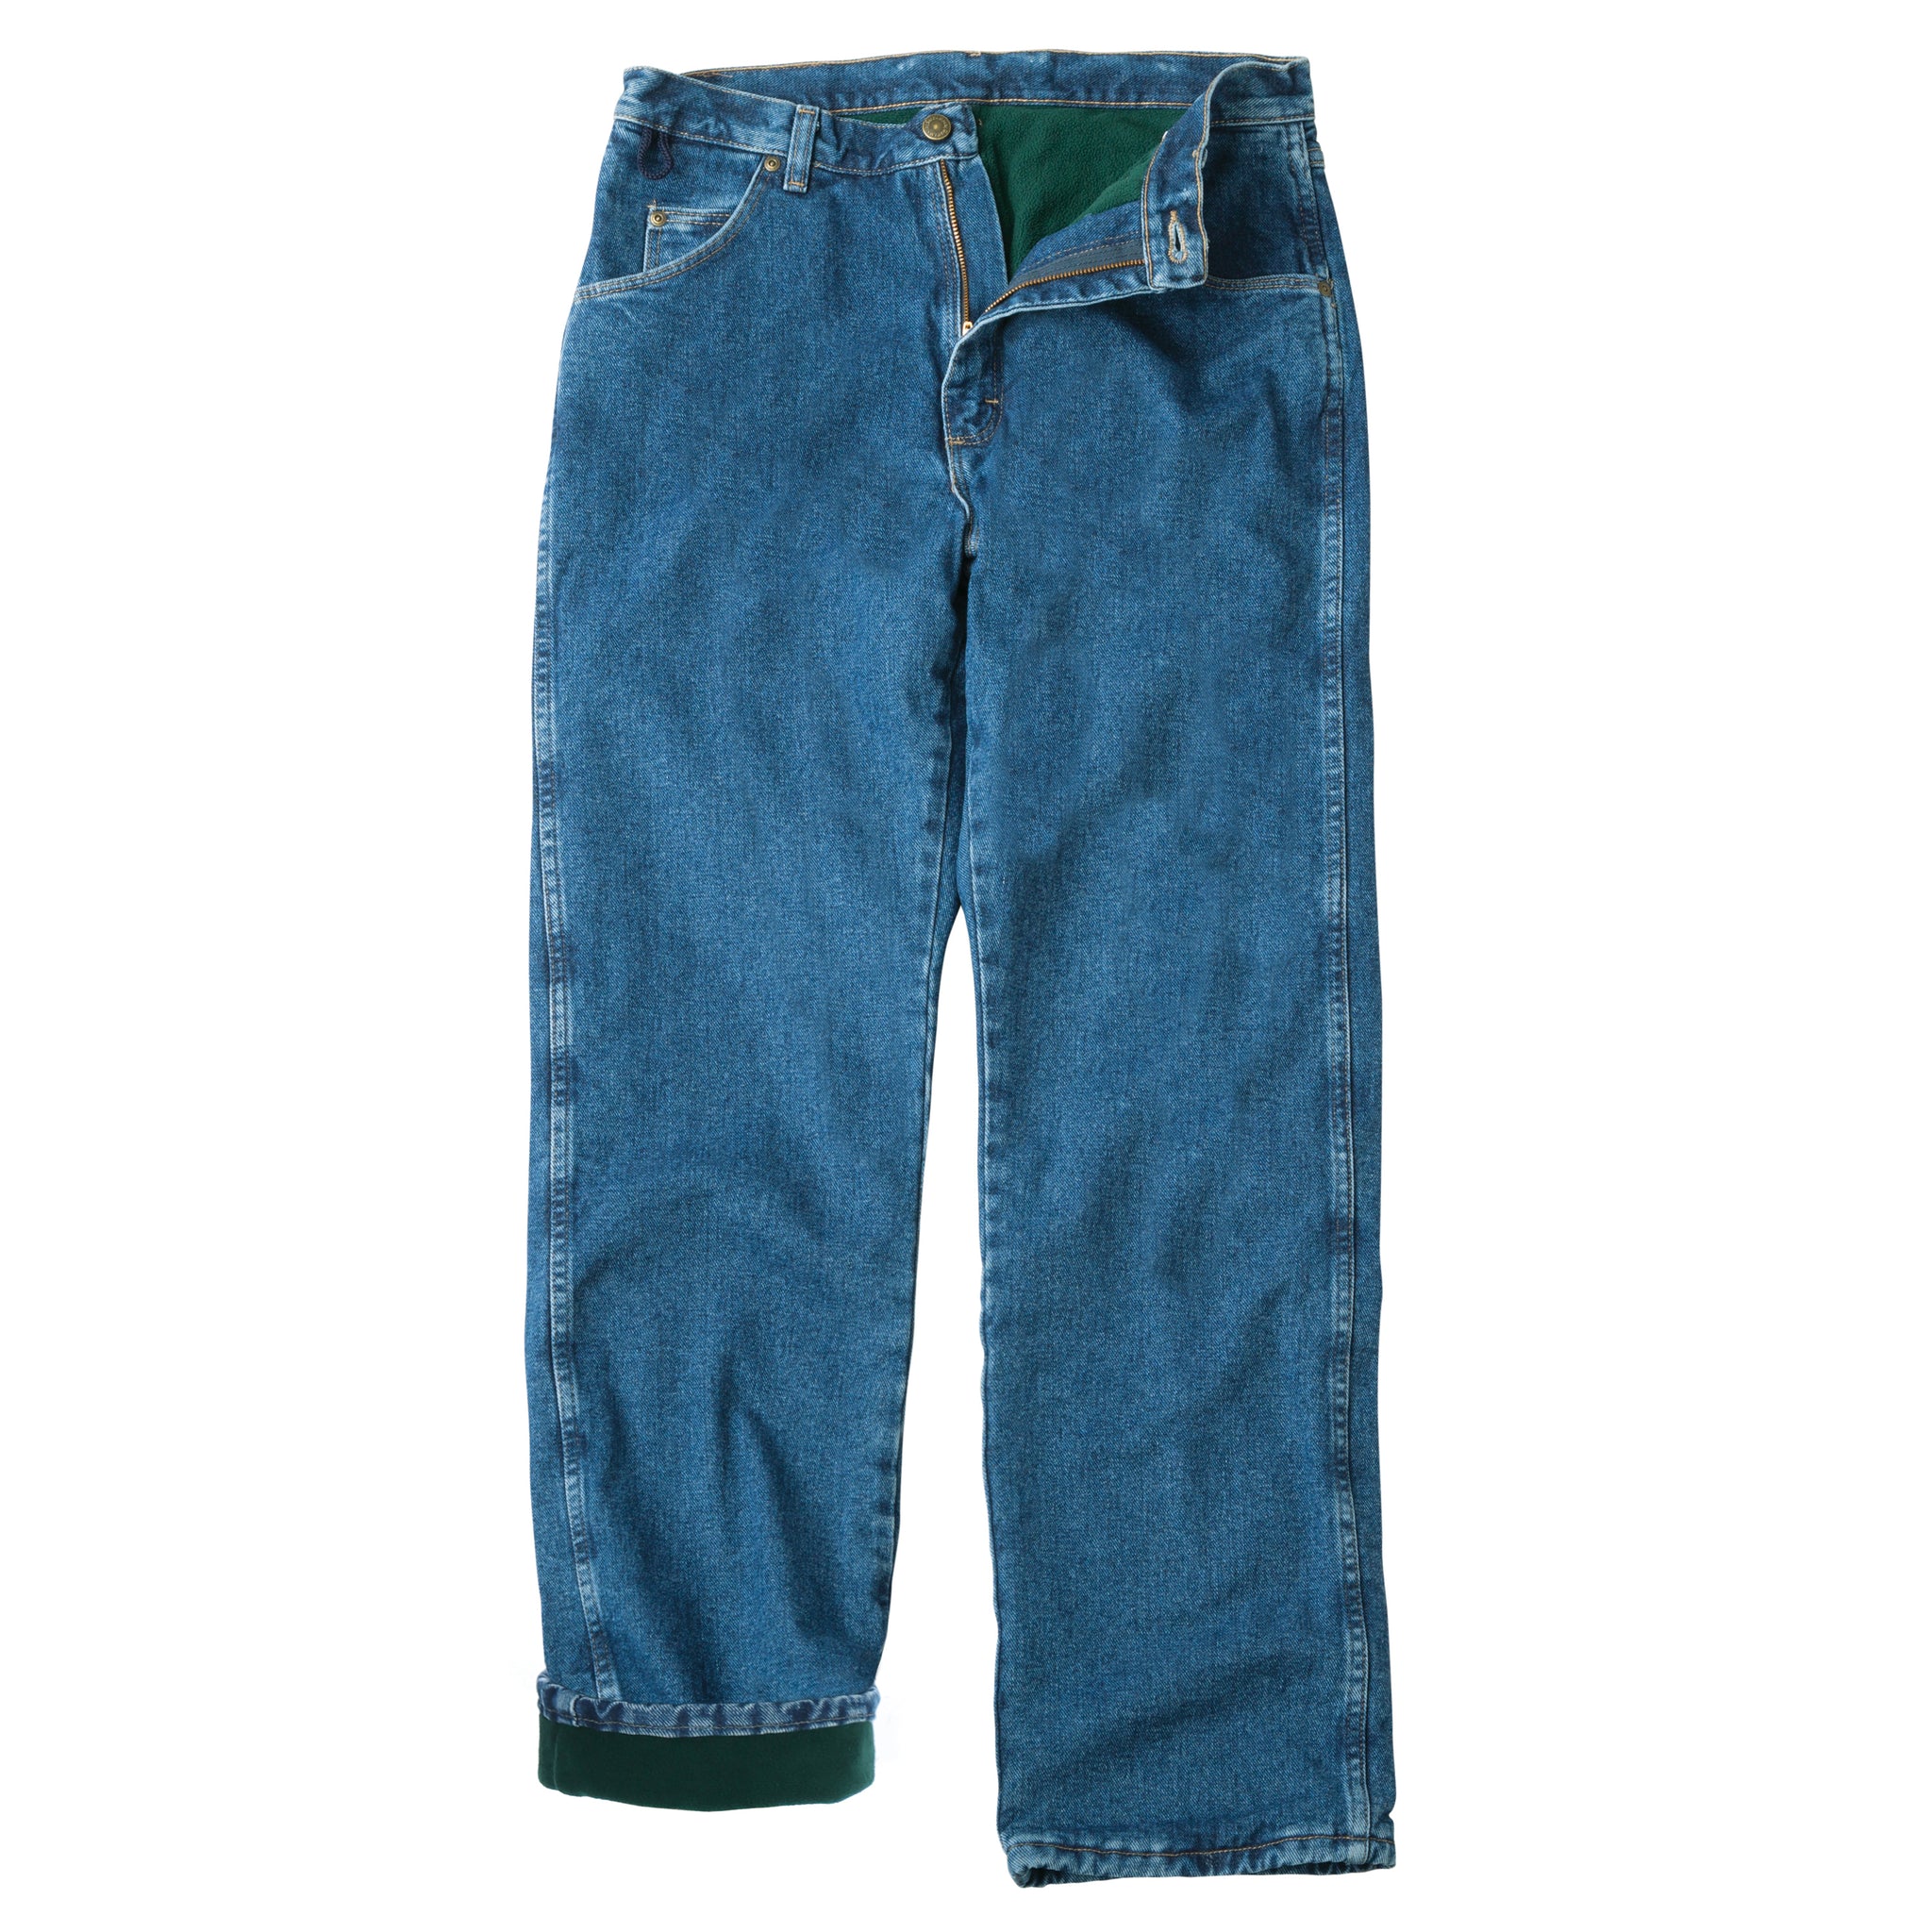 Liberty Blues Men's Big & Tall Flannel-lined Side-elastic Jeans - 36 34,  Blue : Target